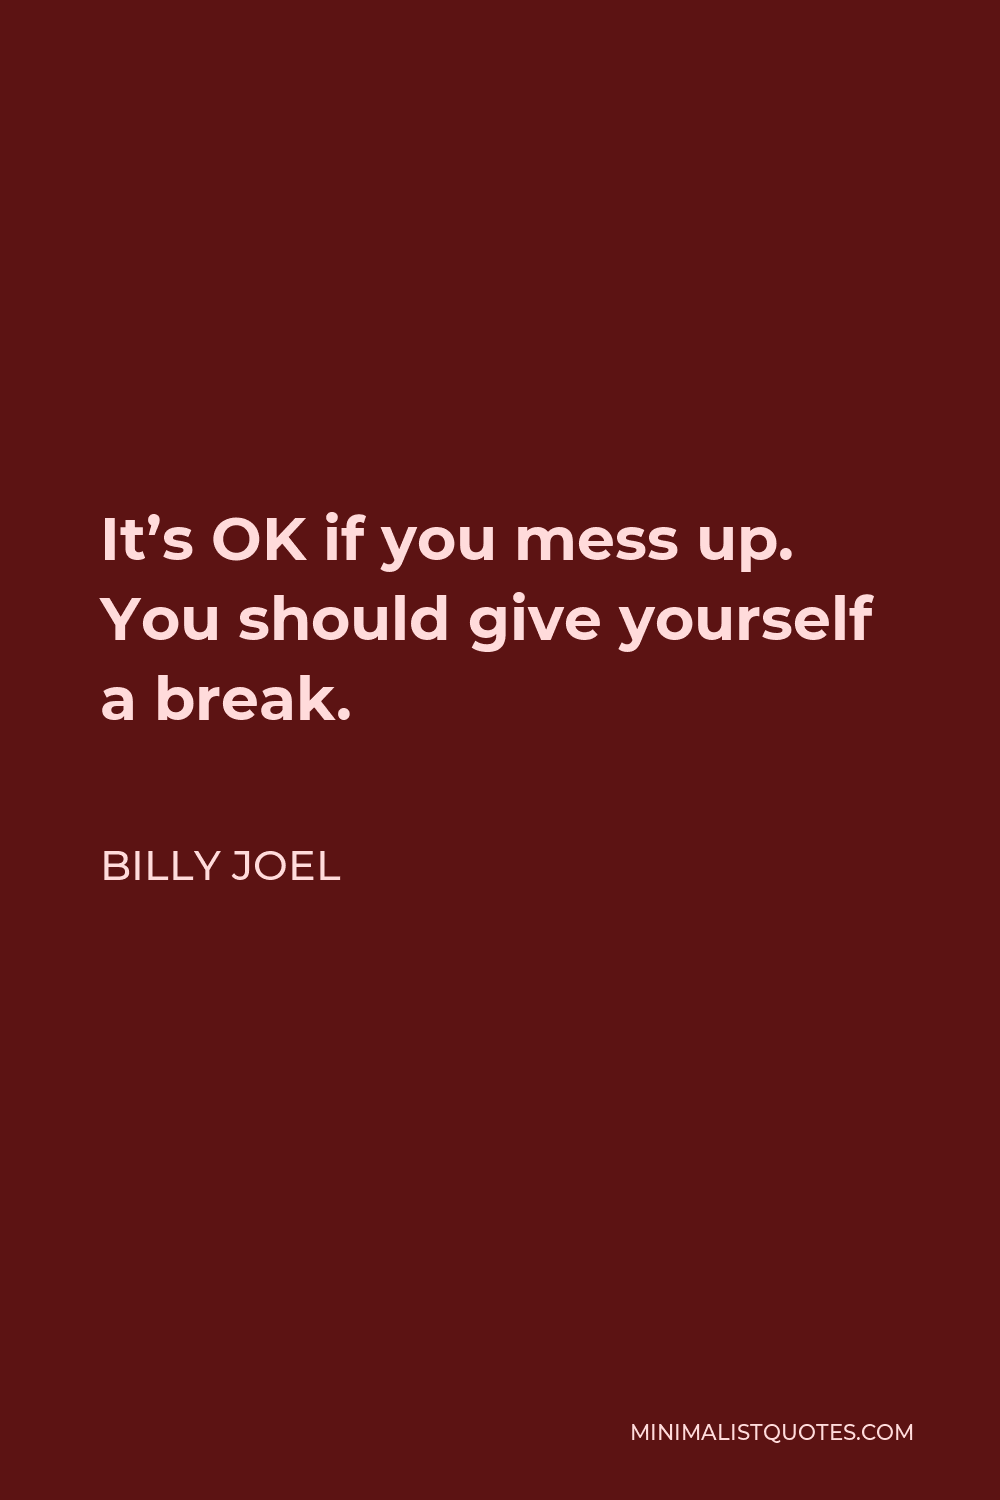 Billy Joel Quote - It’s OK if you mess up. You should give yourself a break.